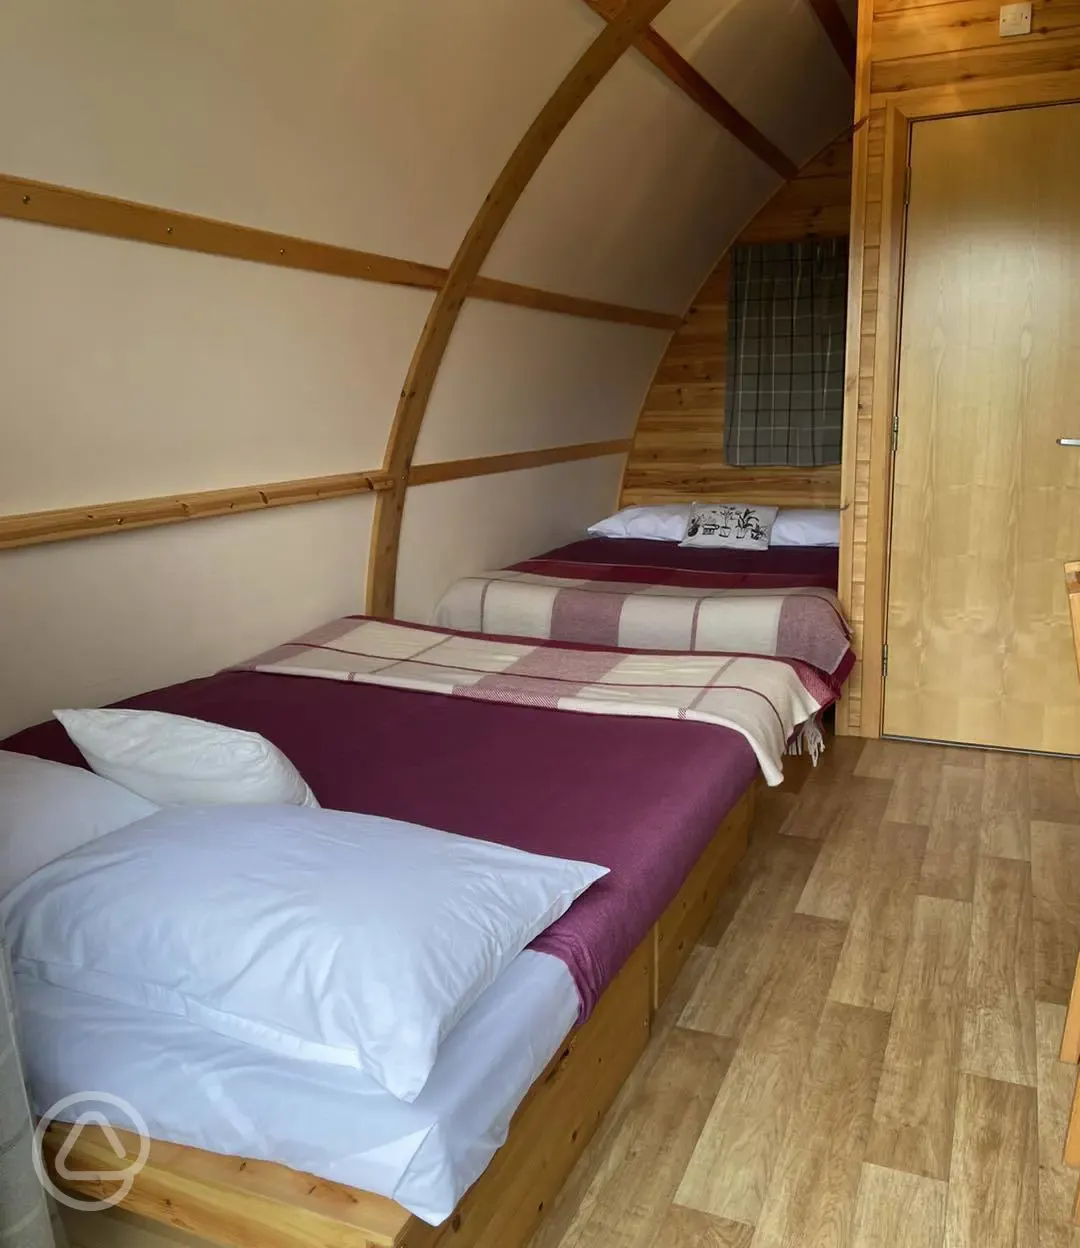 Deluxe Wigwam pod with sofa bed